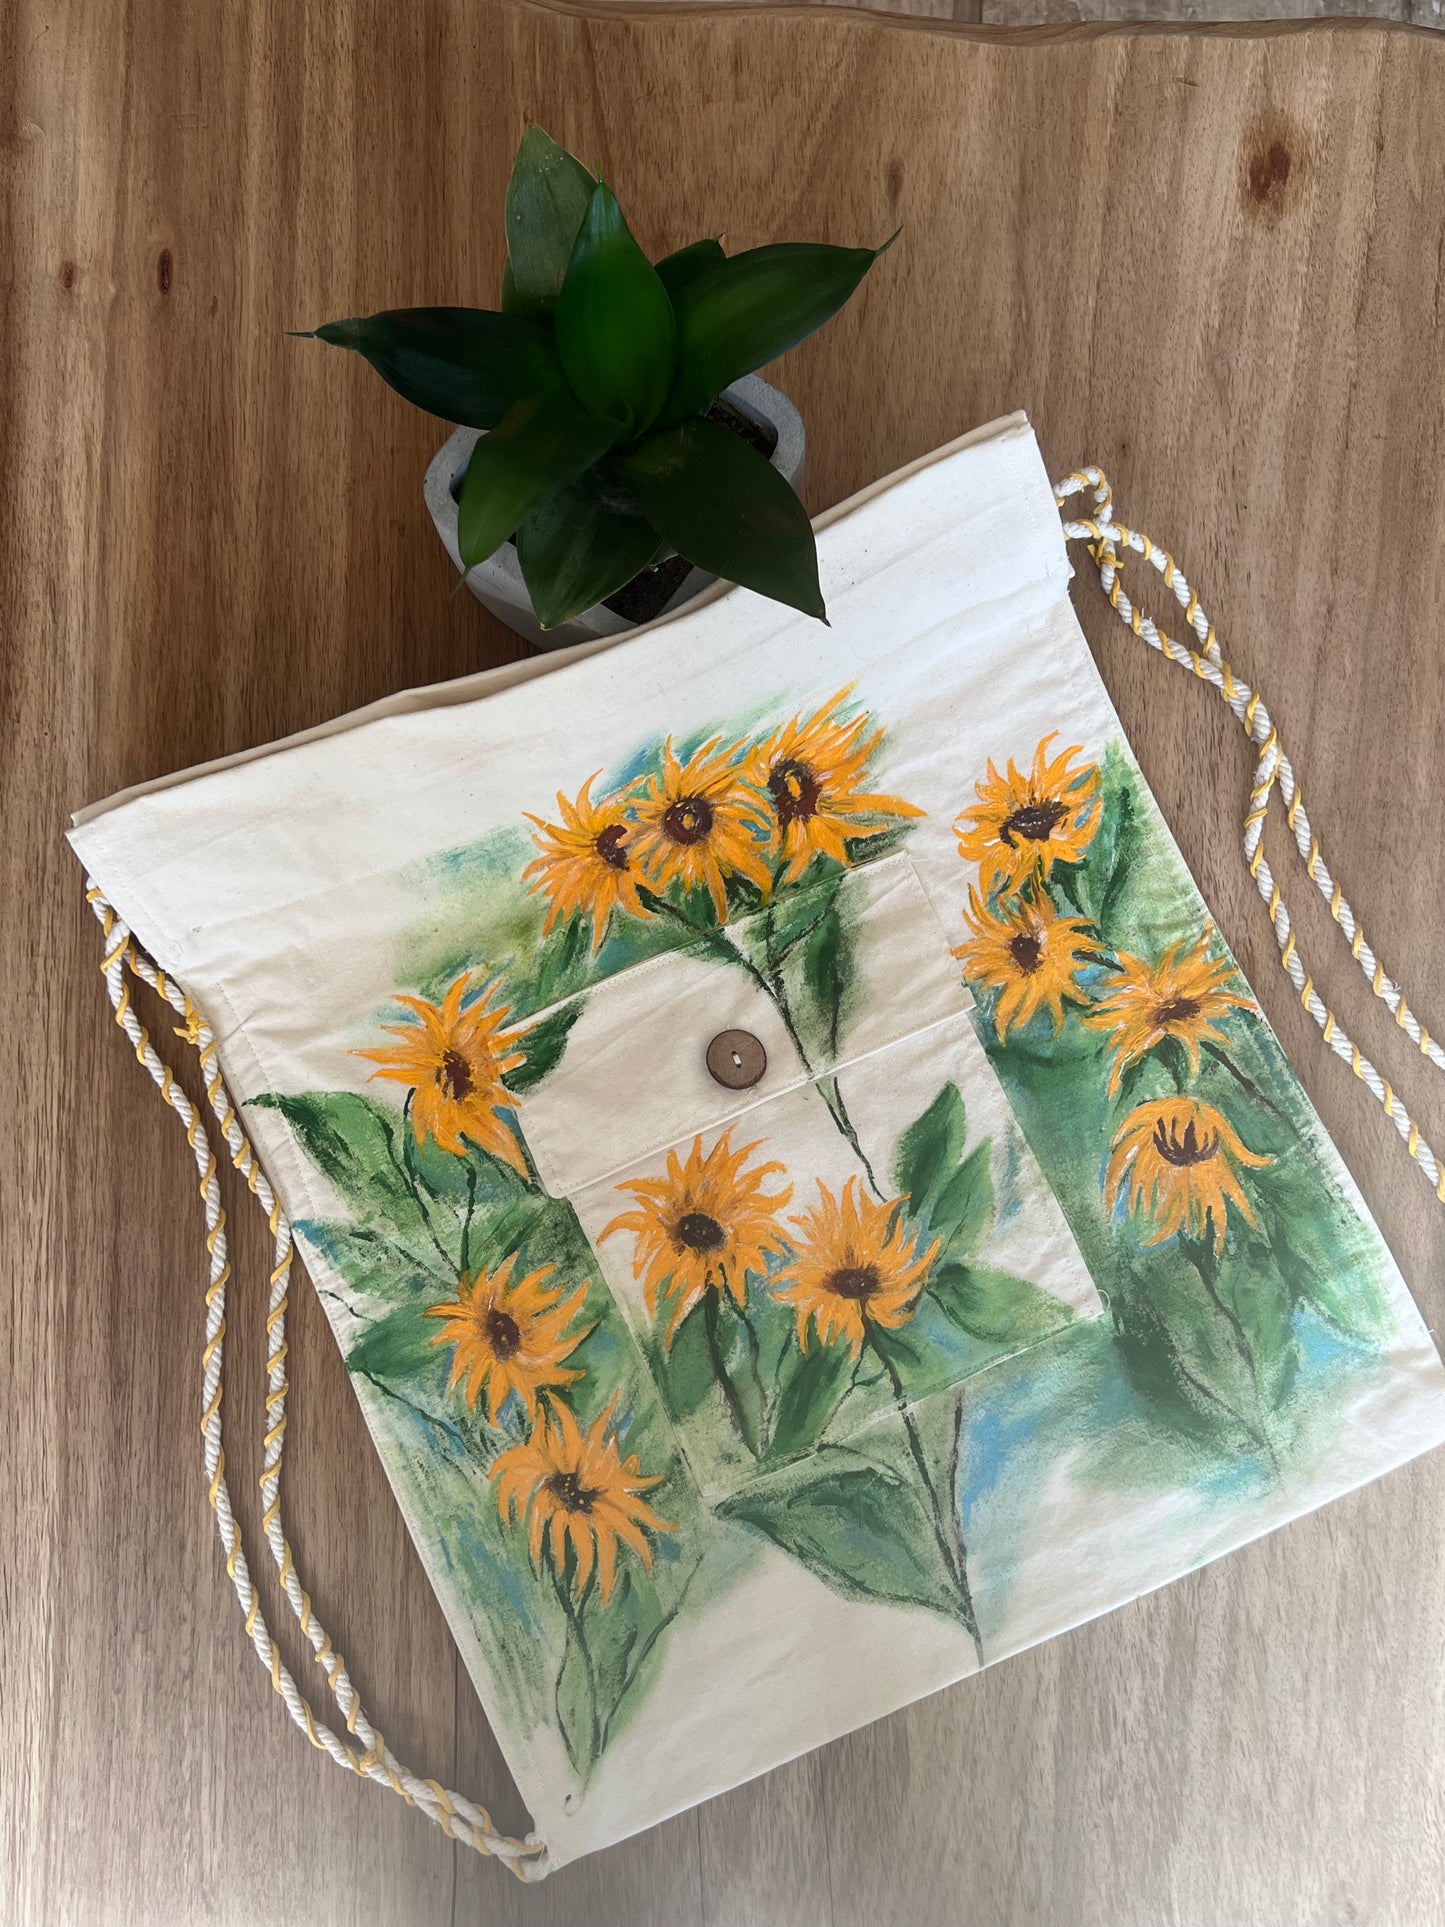 Sunflower Hand Painted Cotton Bag